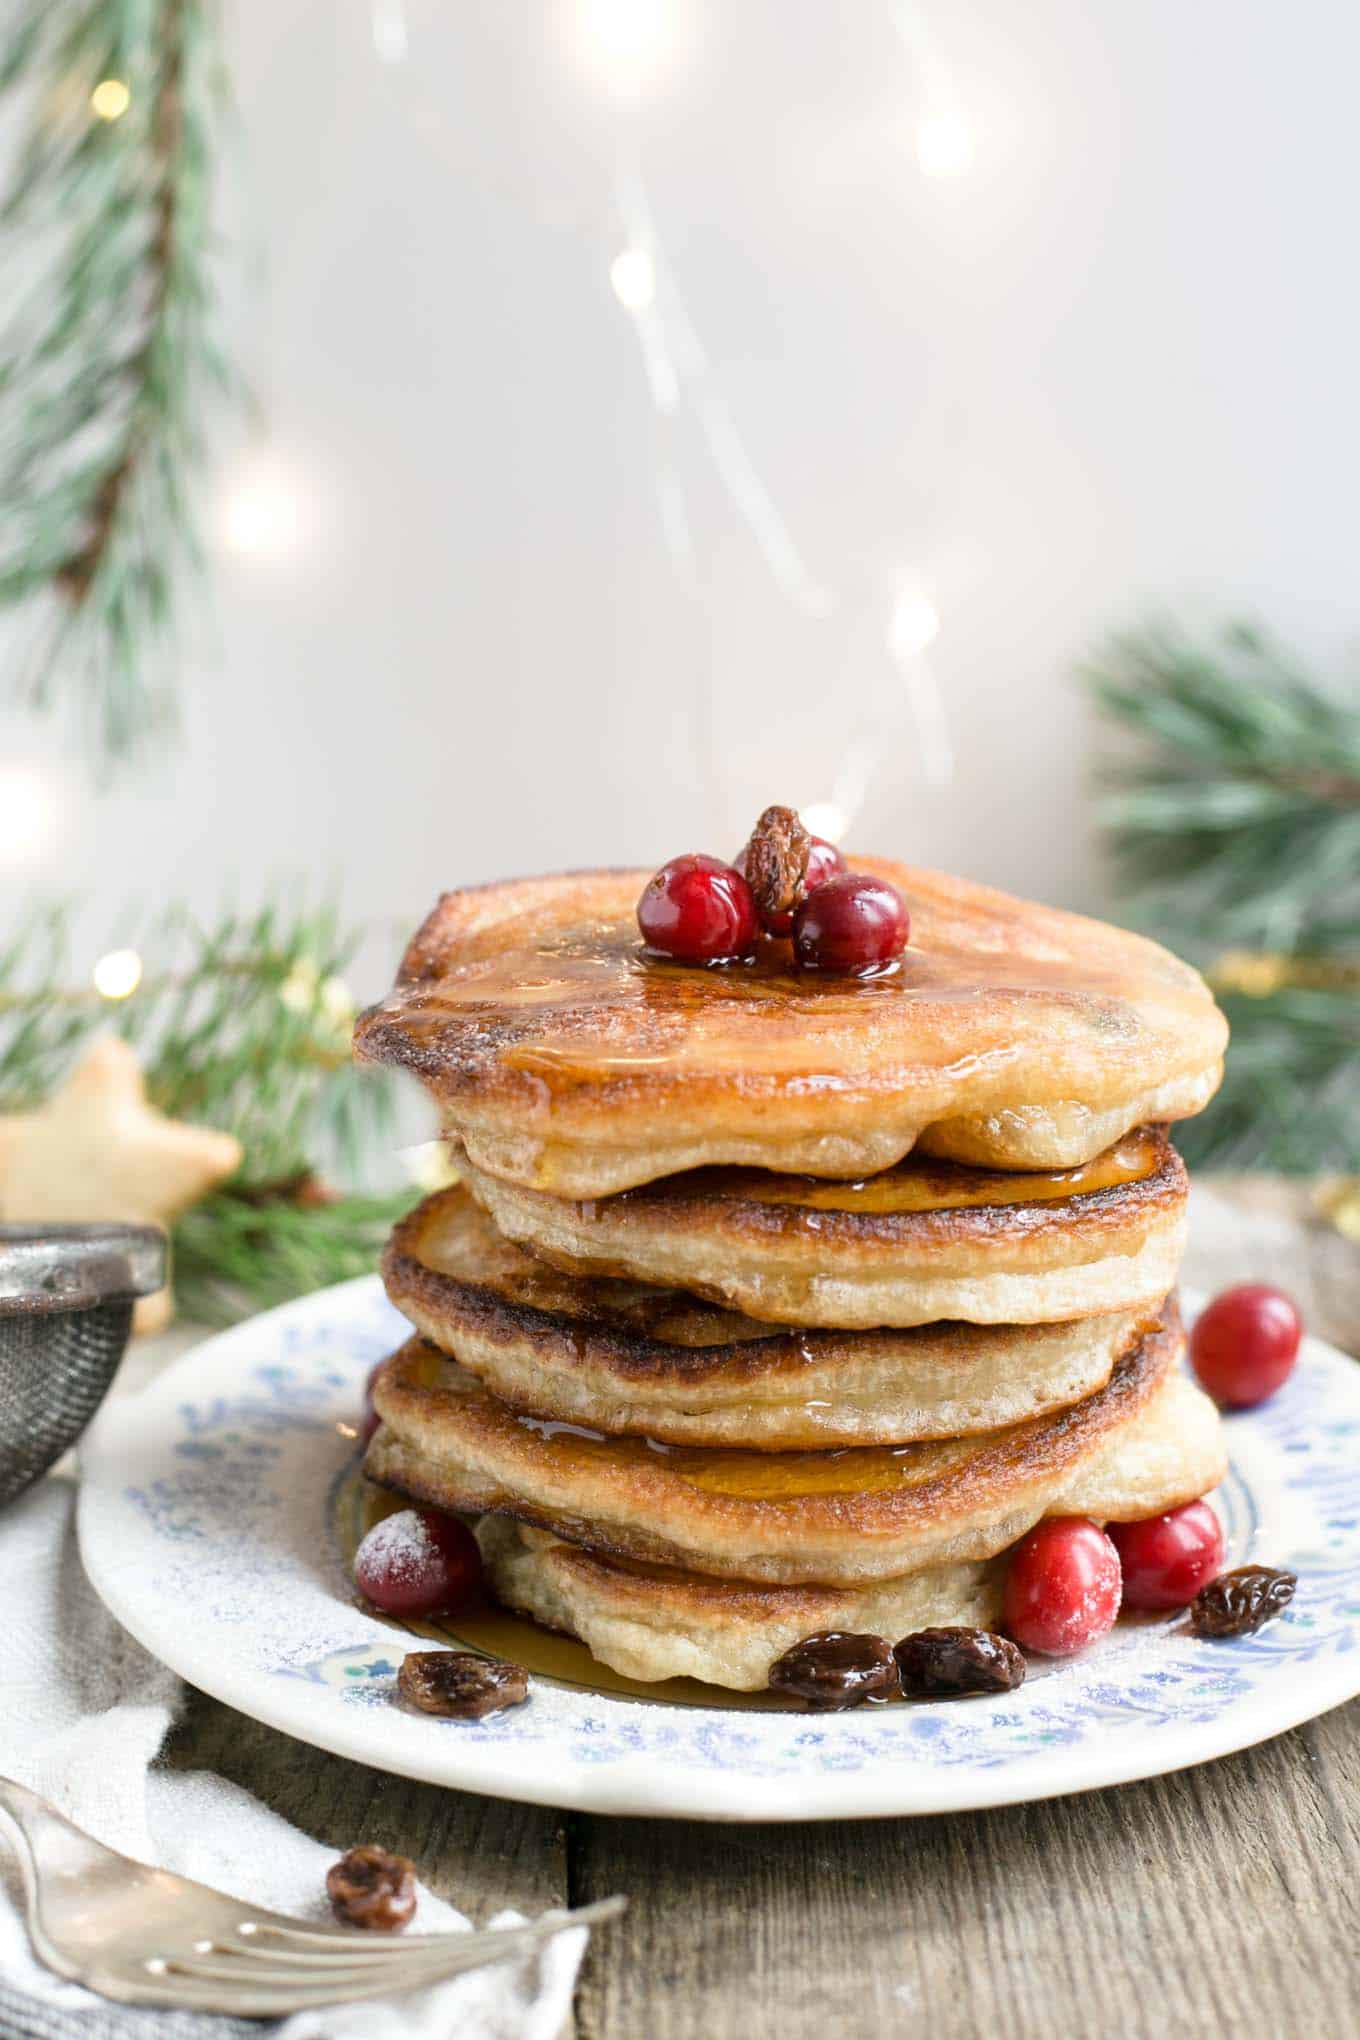 Sensational rum & raisin pancakes for breakfast or brunch! They are super easy to make, and will quickly become your favourite! #vegan #pancakes #dairyfree | via @annabanana.co